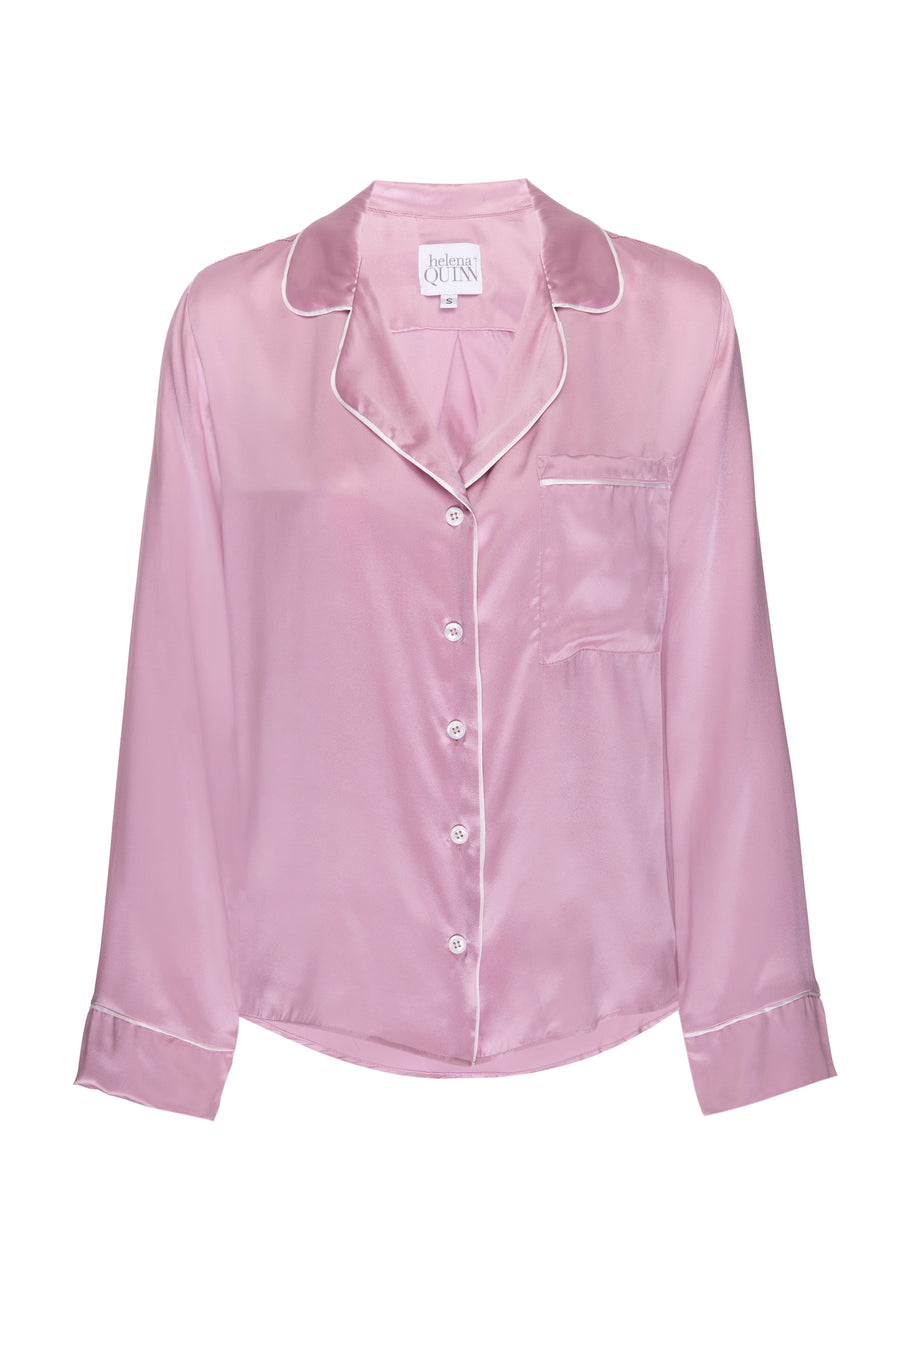 Silk Charmeuse Long Sleeved Top: Orchid Pink